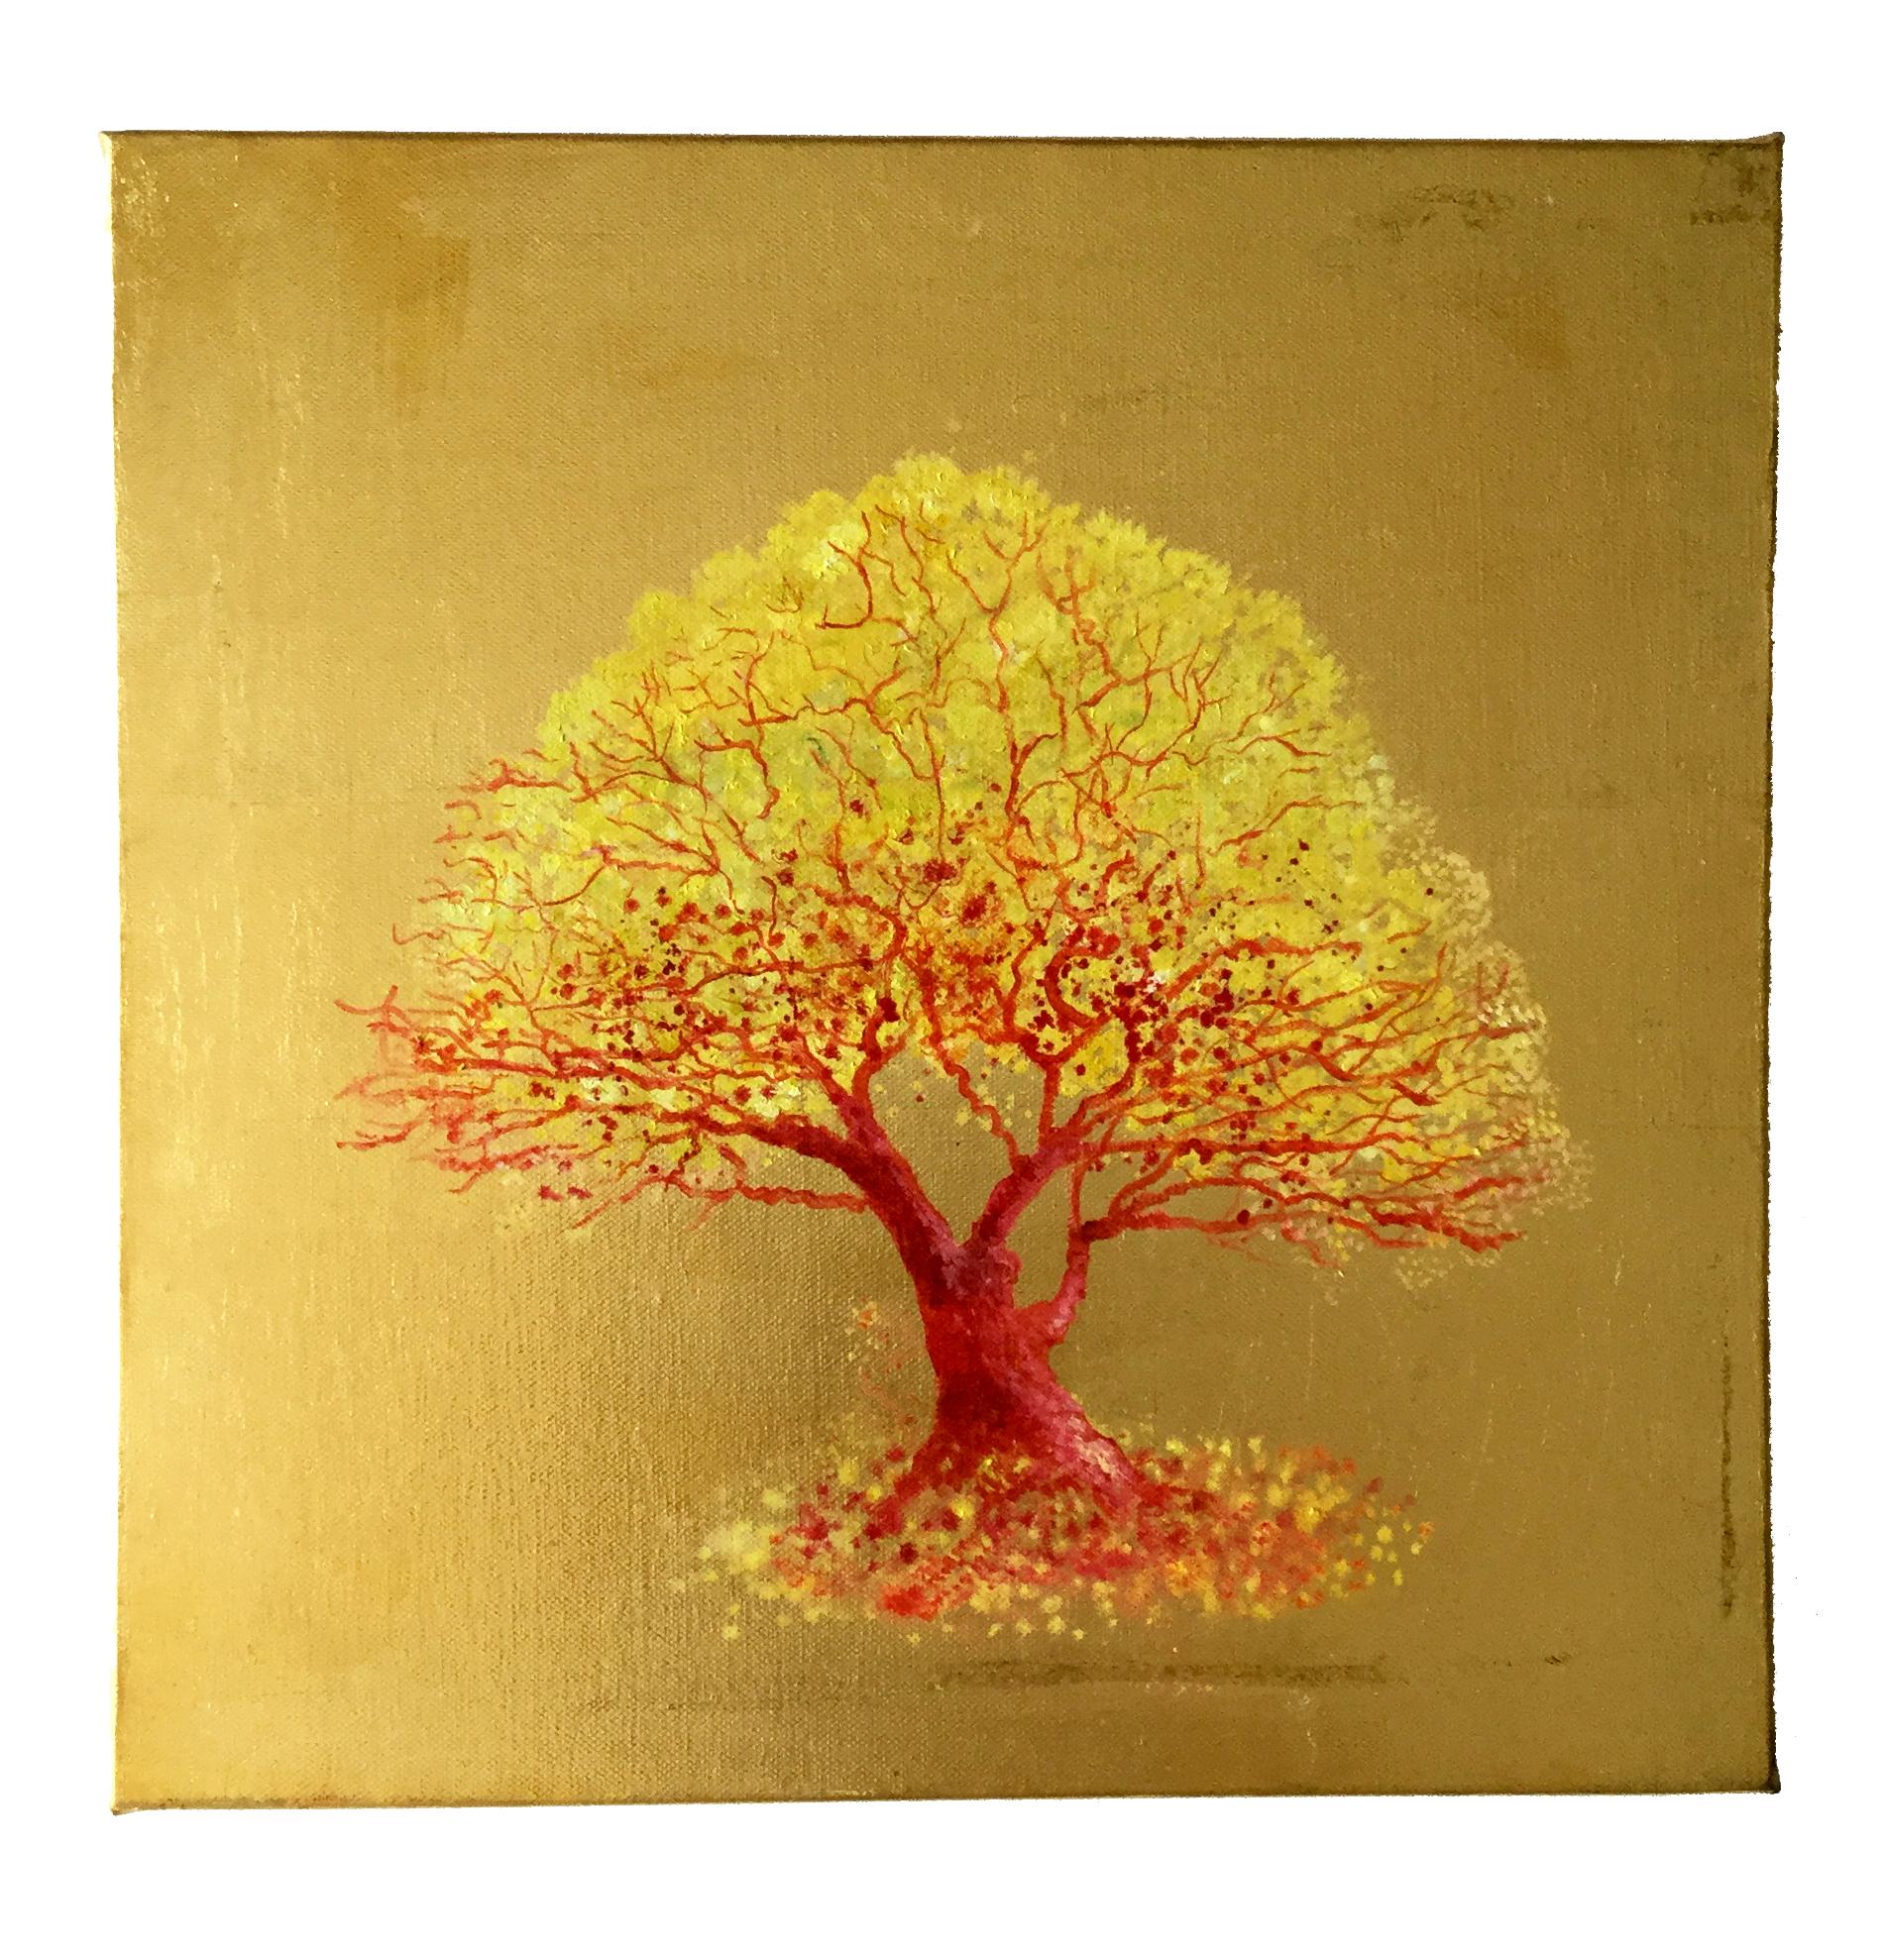 Anastasia Gklava Landscape Painting - Remember Me, Yellow & Orange Tree, Pop style painting, Oil on Canvas Gold Leaf